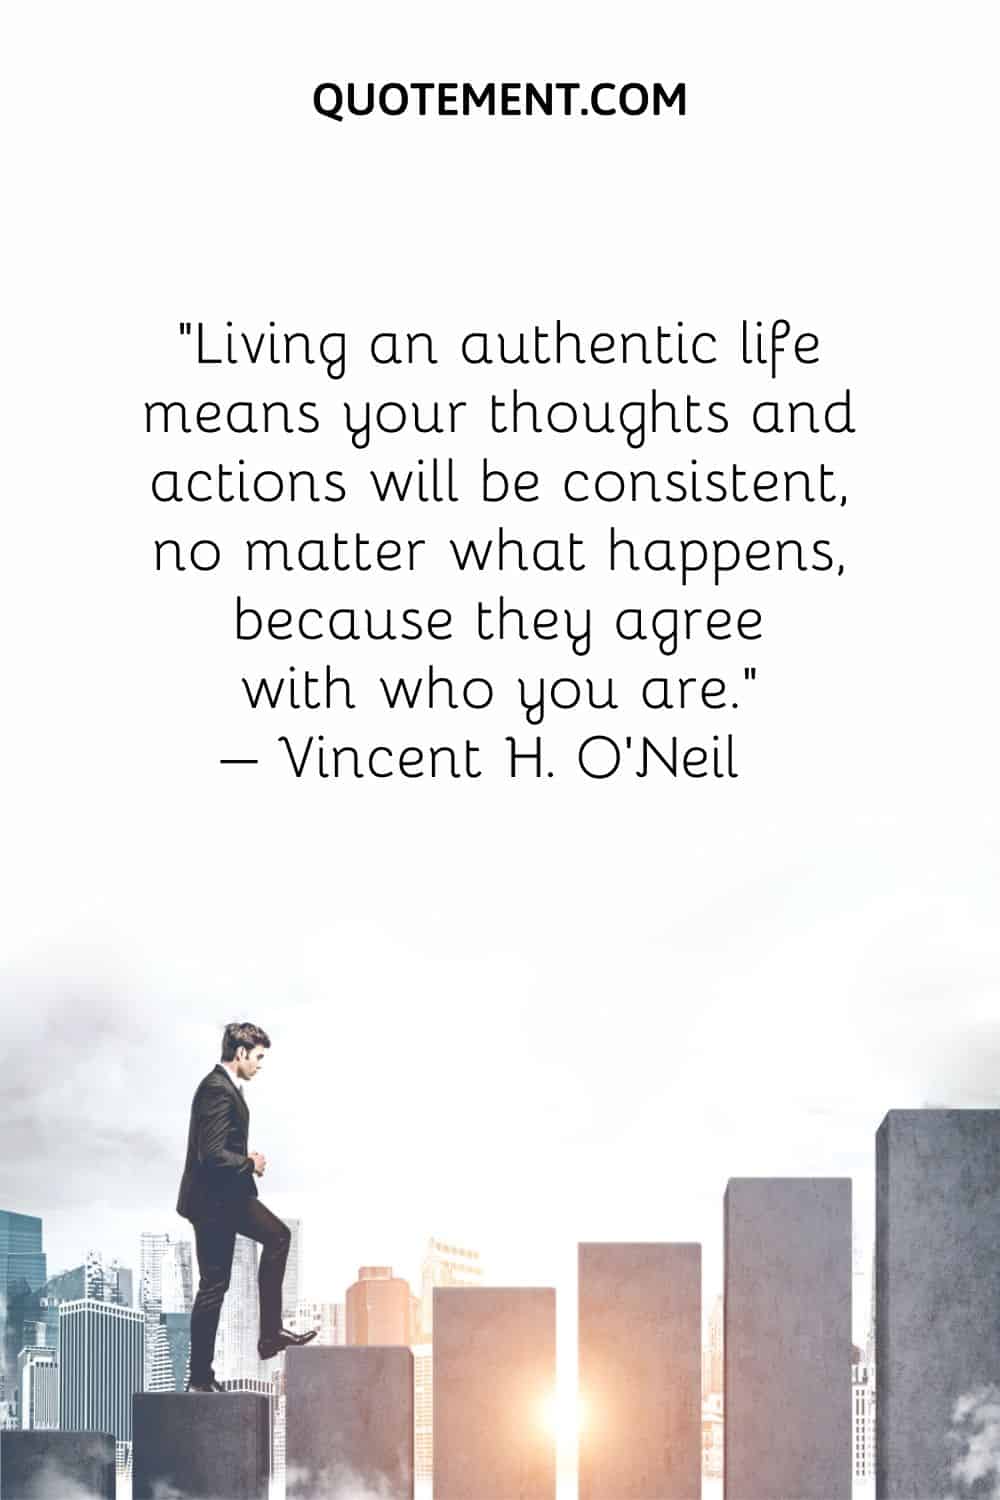 Living an authentic life means your thoughts and actions will be consistent, no matter what happens